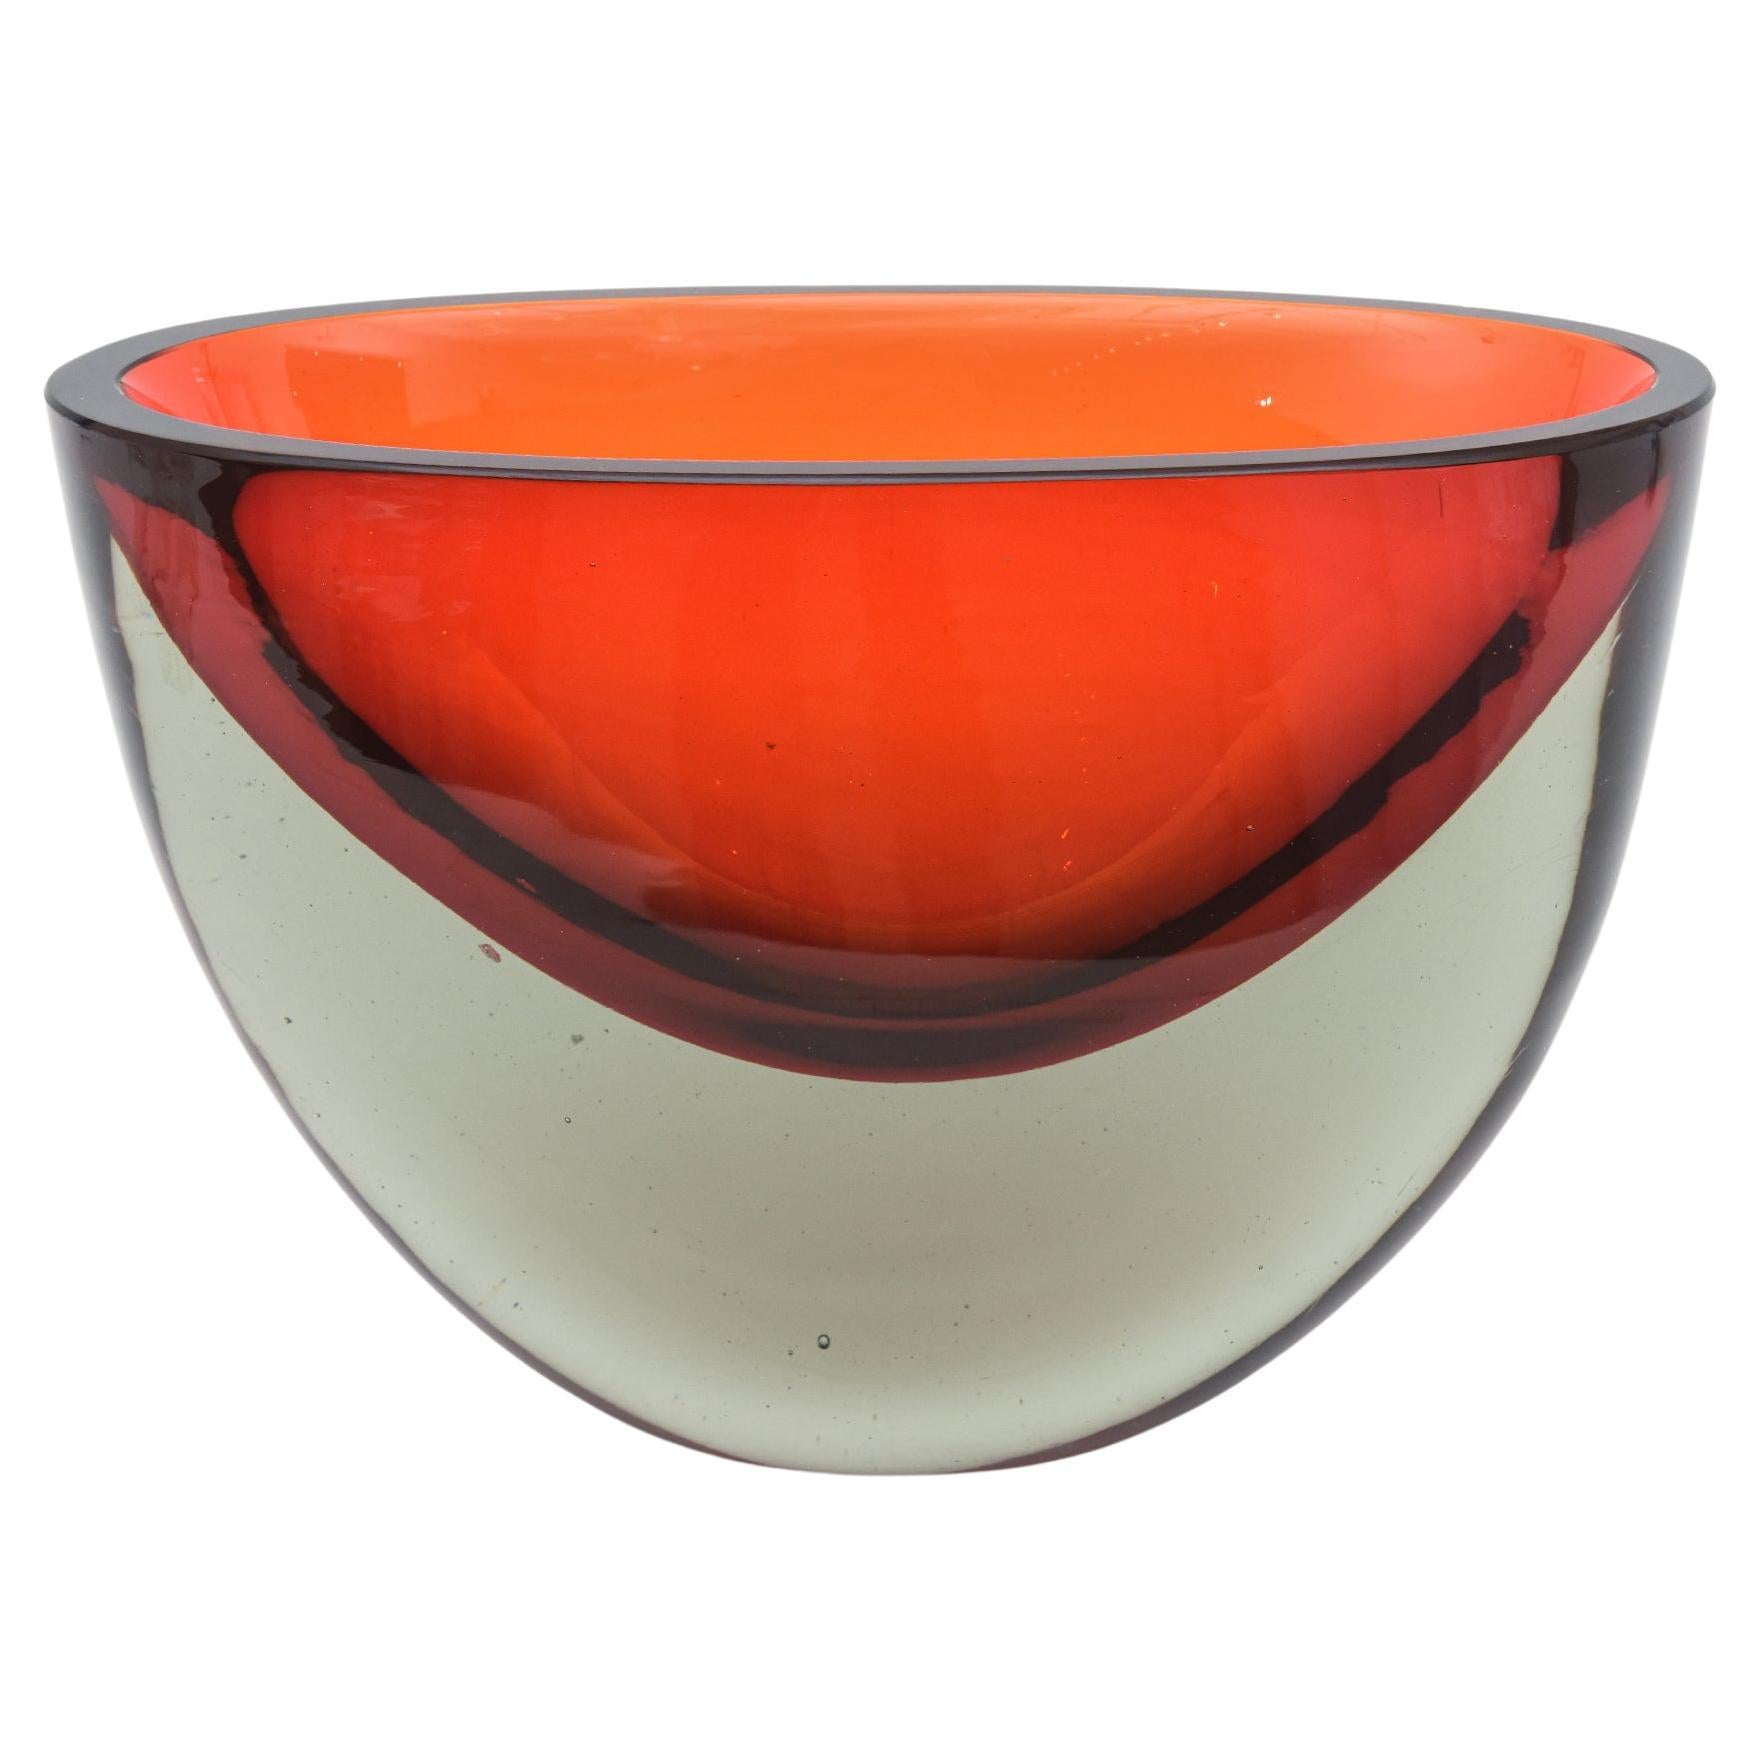 Vintage Murano Antonio da Ros for Cenedese Red, Charcoal, Orange Sommerso Vase  For Sale